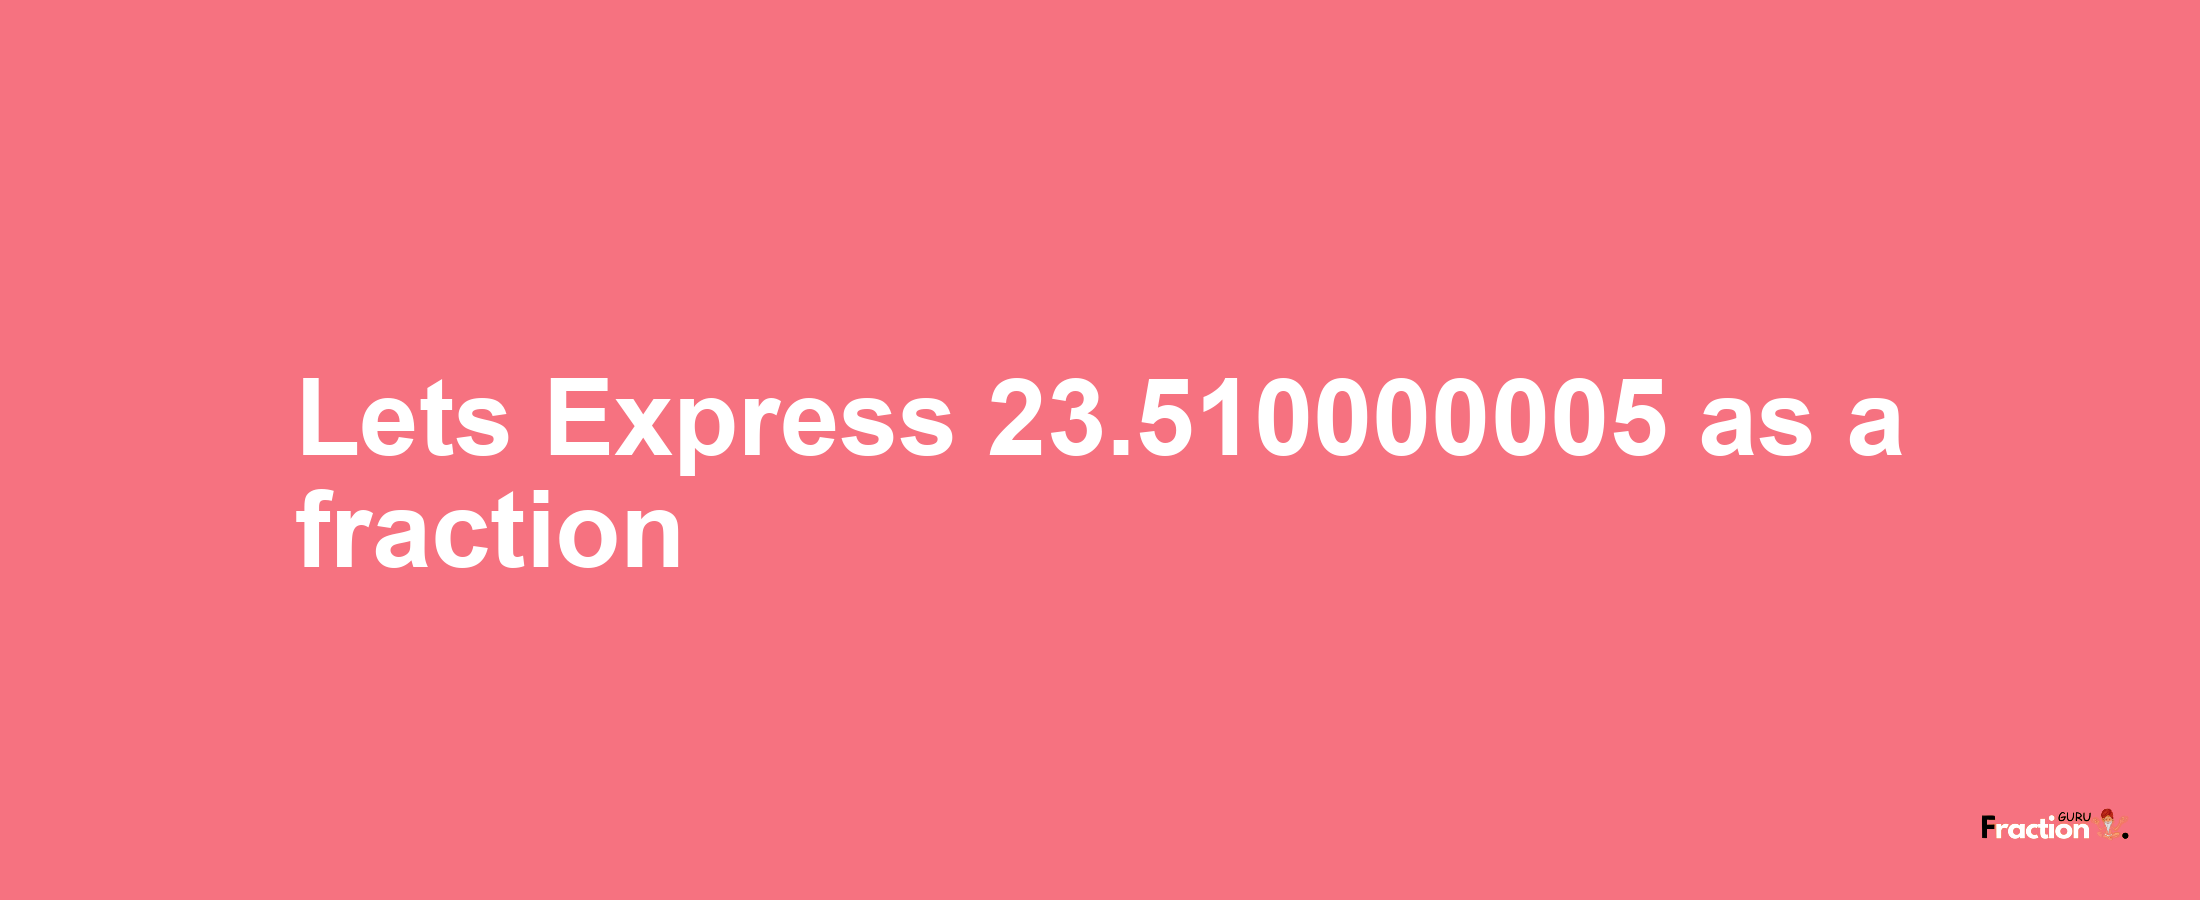 Lets Express 23.510000005 as afraction